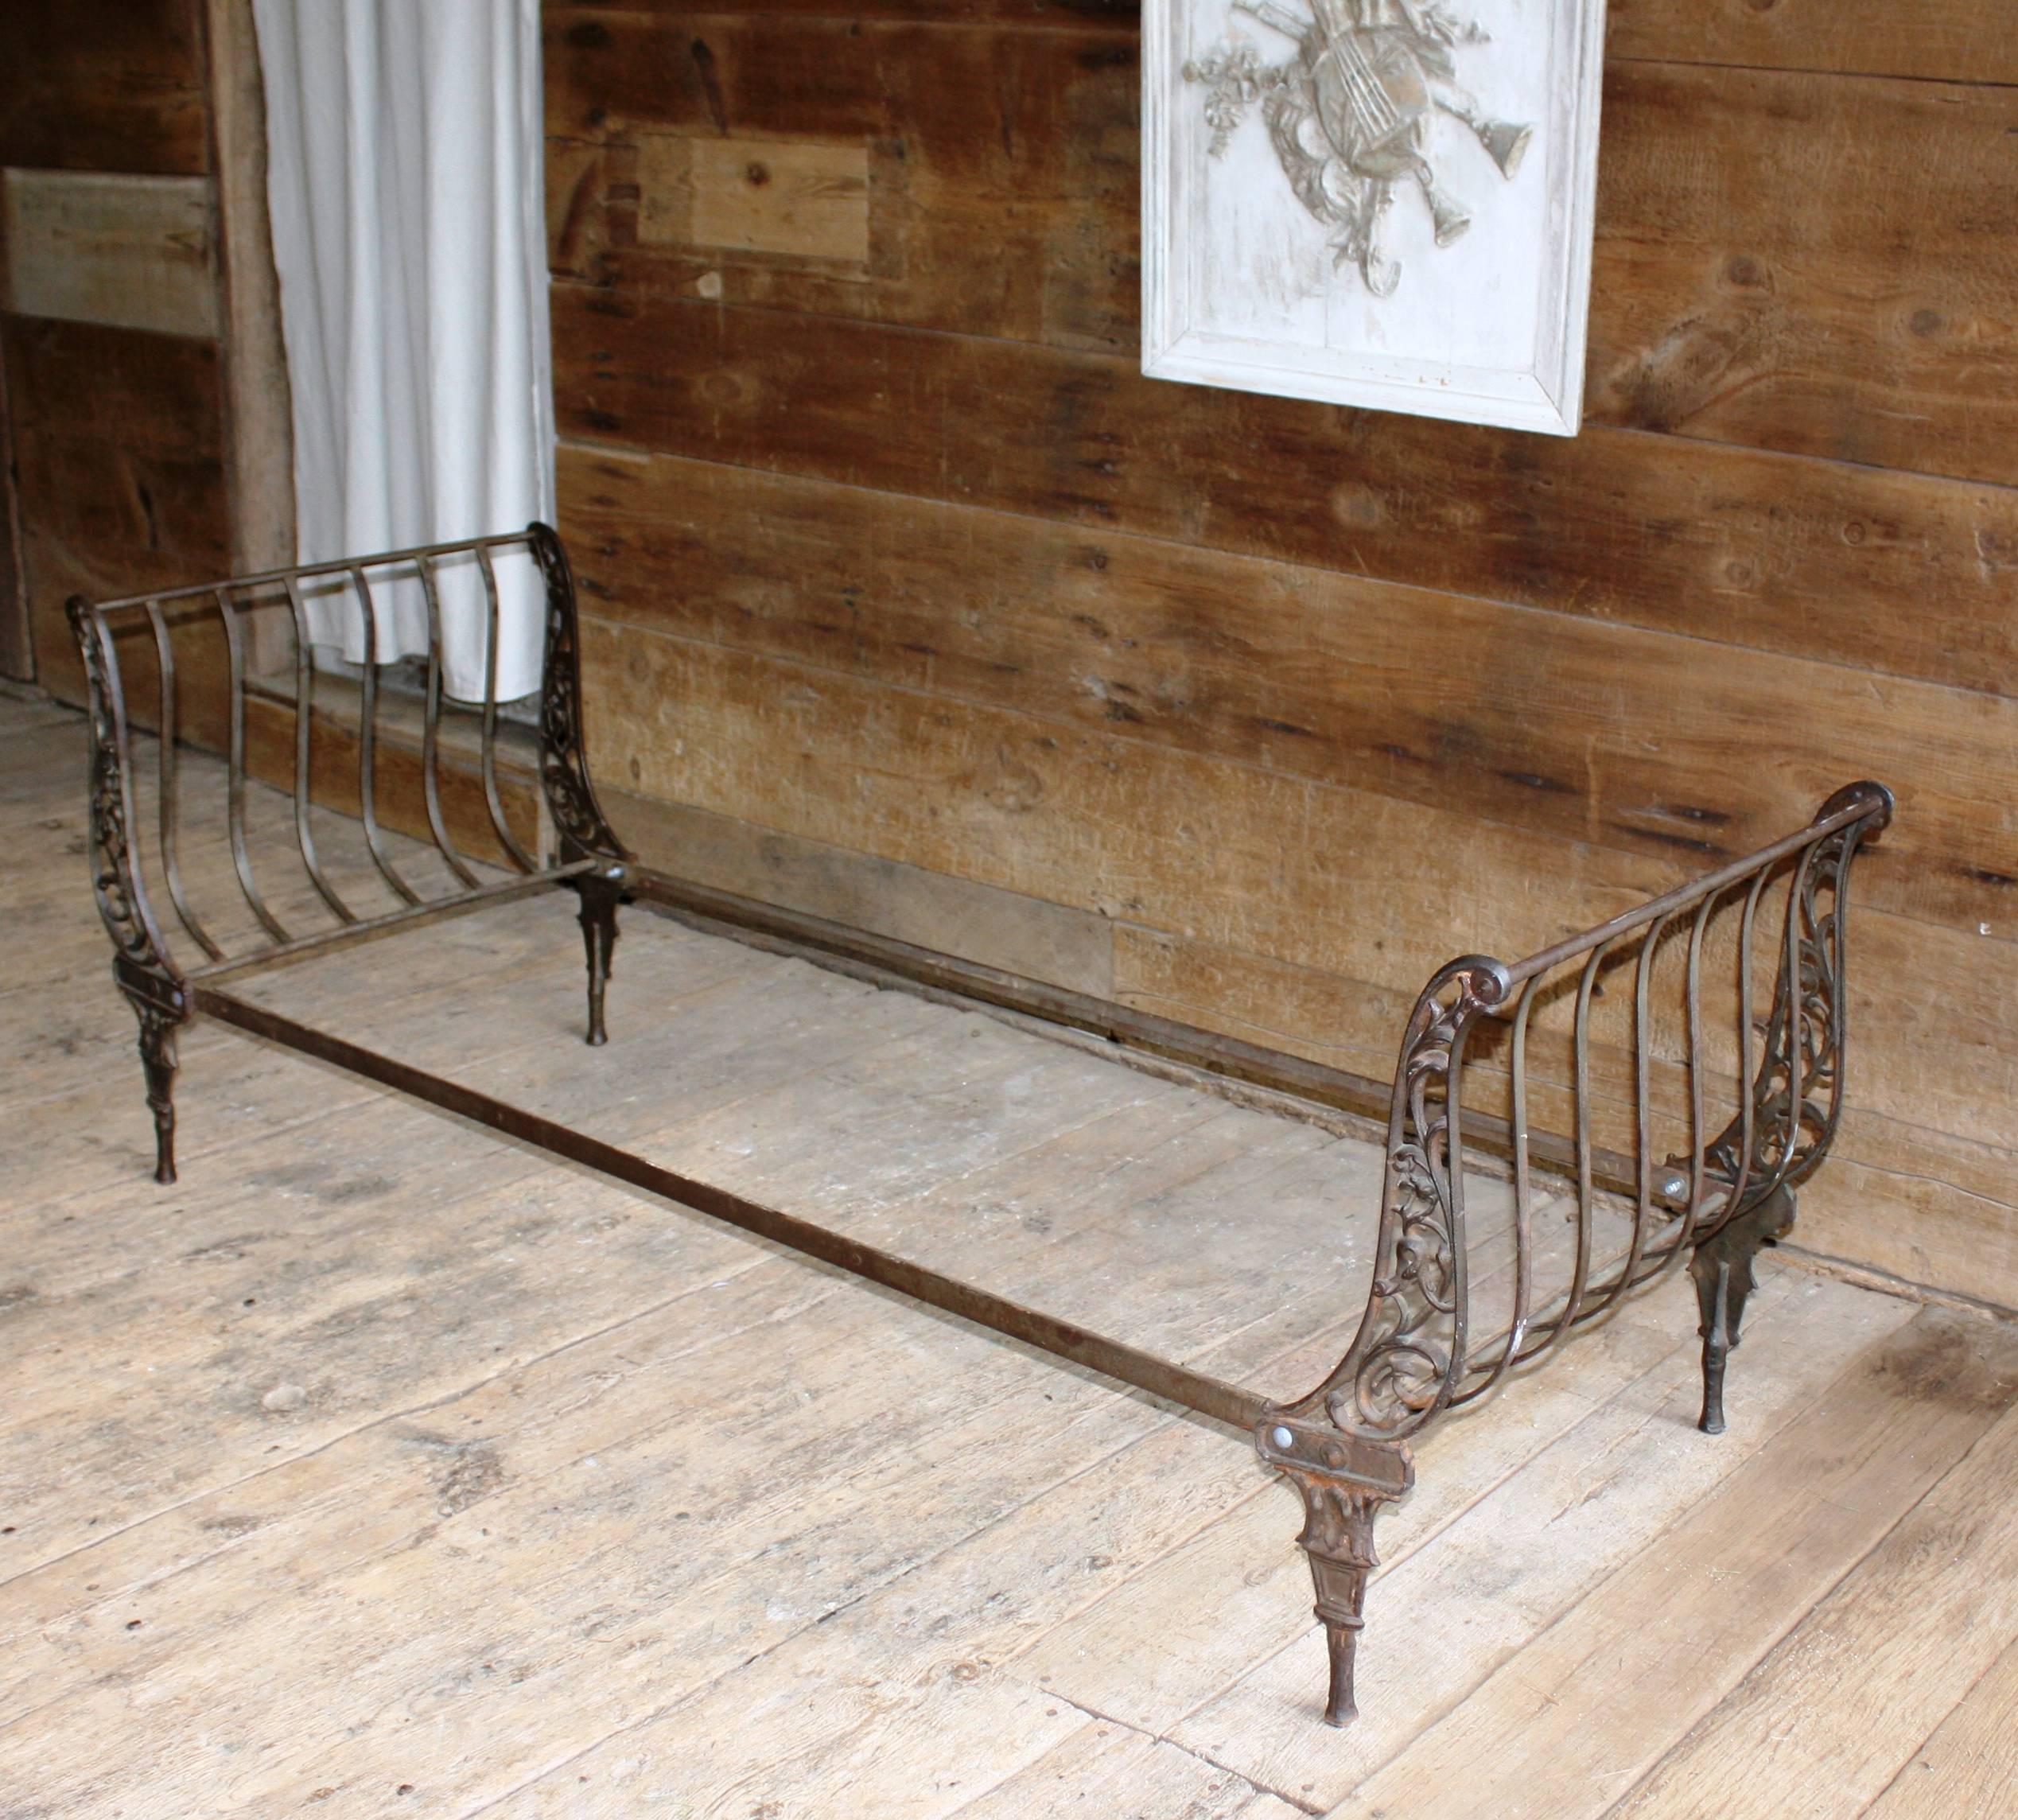 A charming, Napoleon III period, cast-iron daybed, French, circa 1870, unusually narrow, great size for a sofa. Very sturdy.

Mattress size 72" long x 29" deep. Side rail height 12".